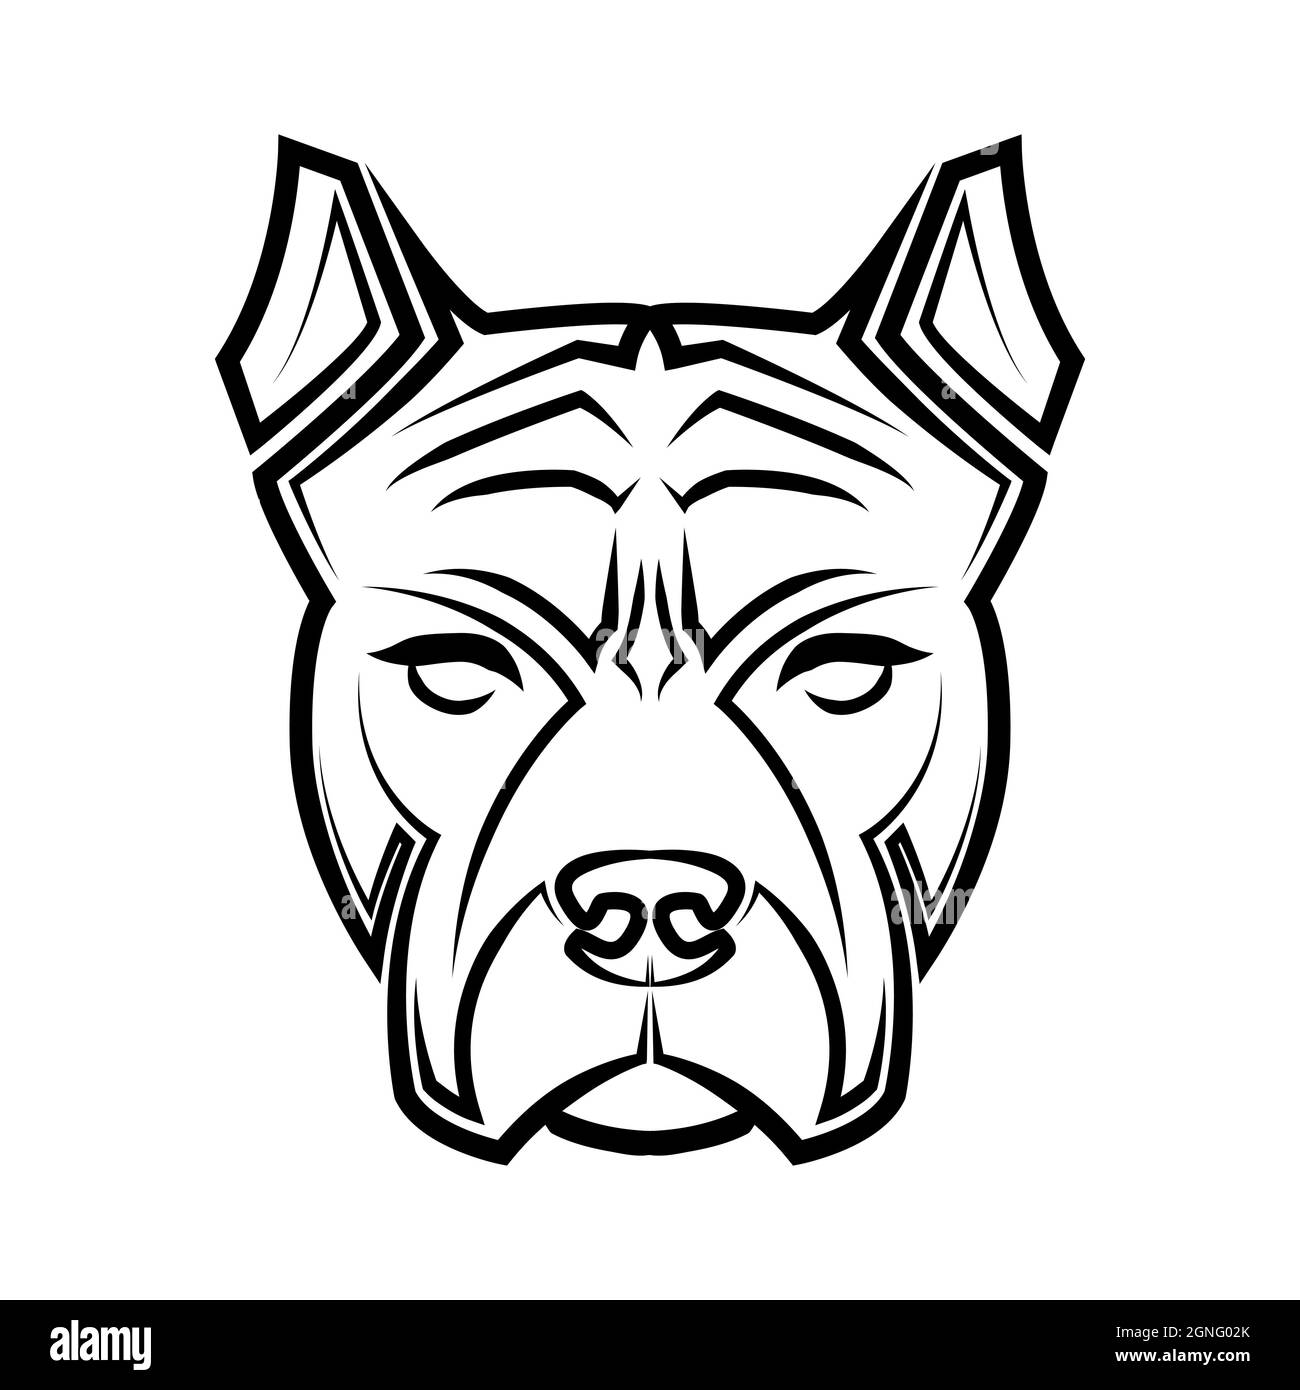 4825 Angry dog Vector Images  Depositphotos